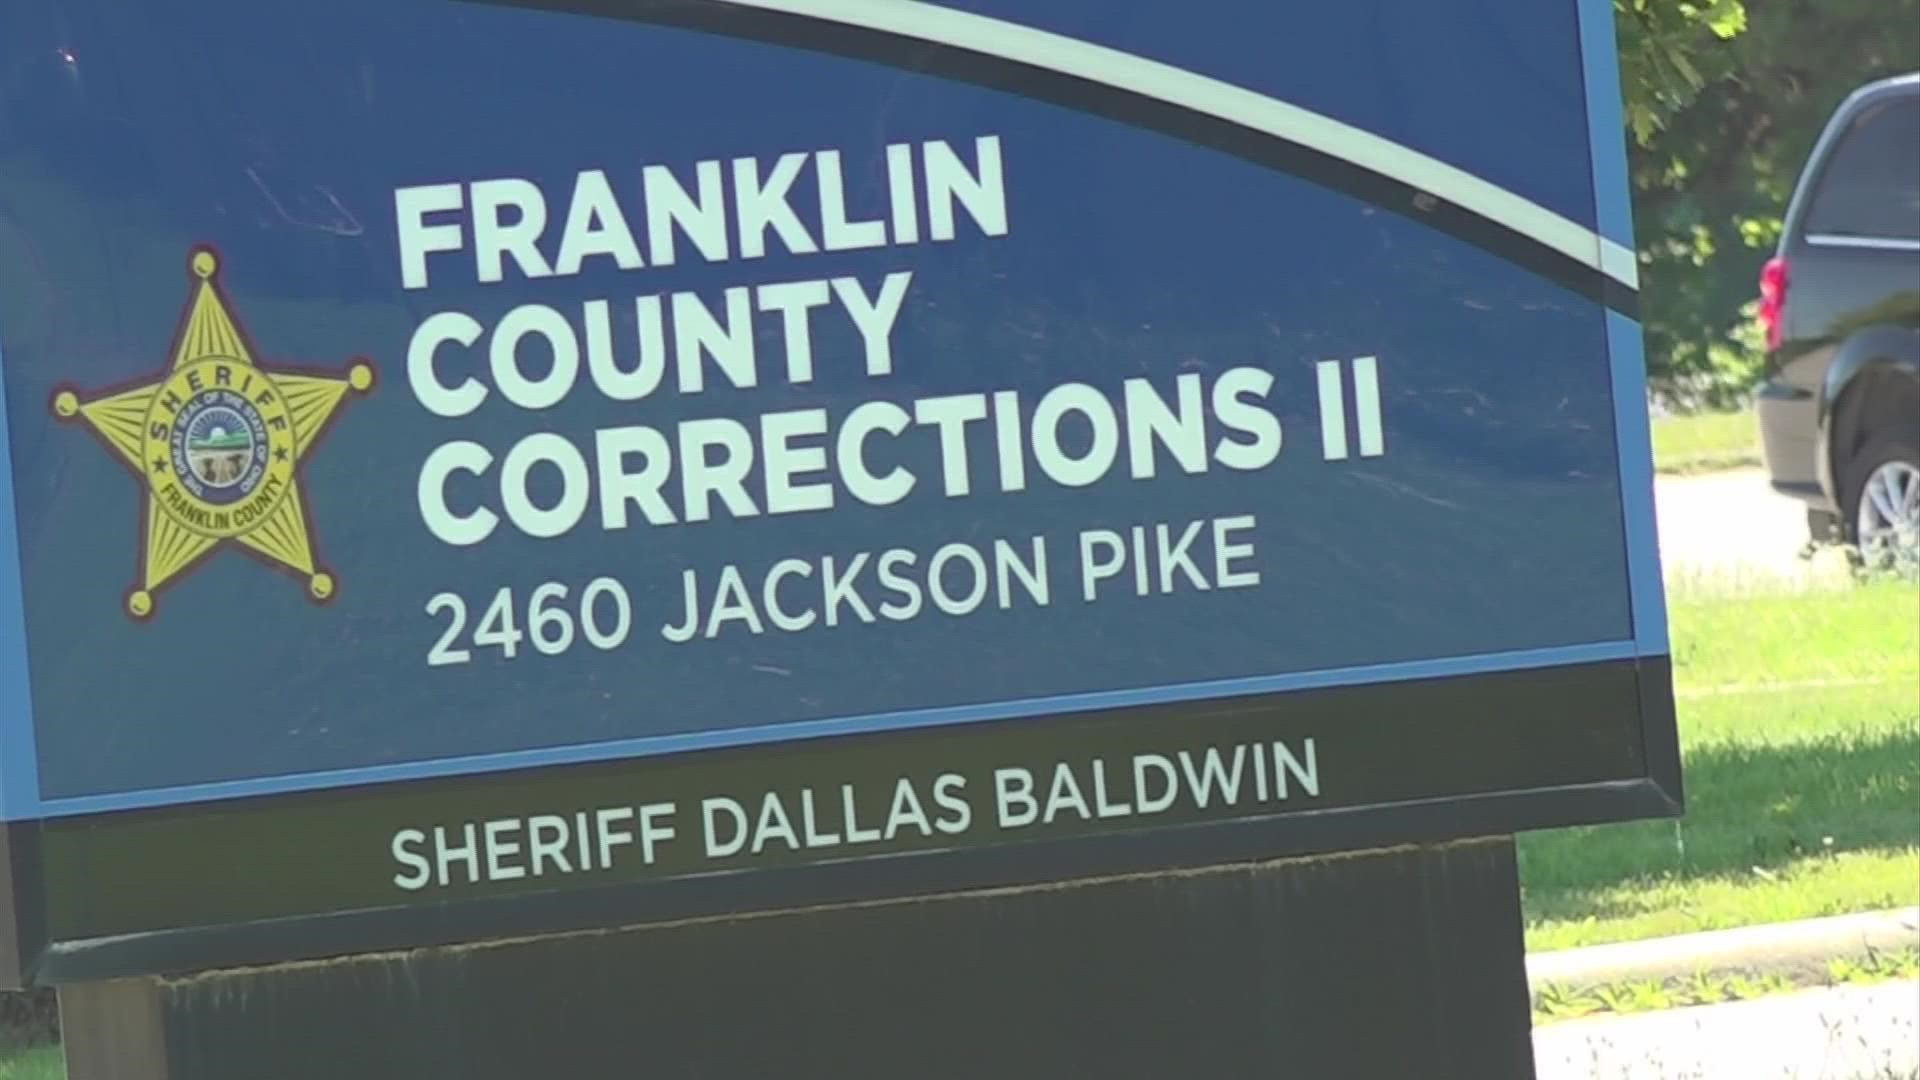 The Franklin County Sheriff’s Office sent its investigation to the Franklin County Prosecutor’s Office in December seeking an 18-count indictment on a female inmate.